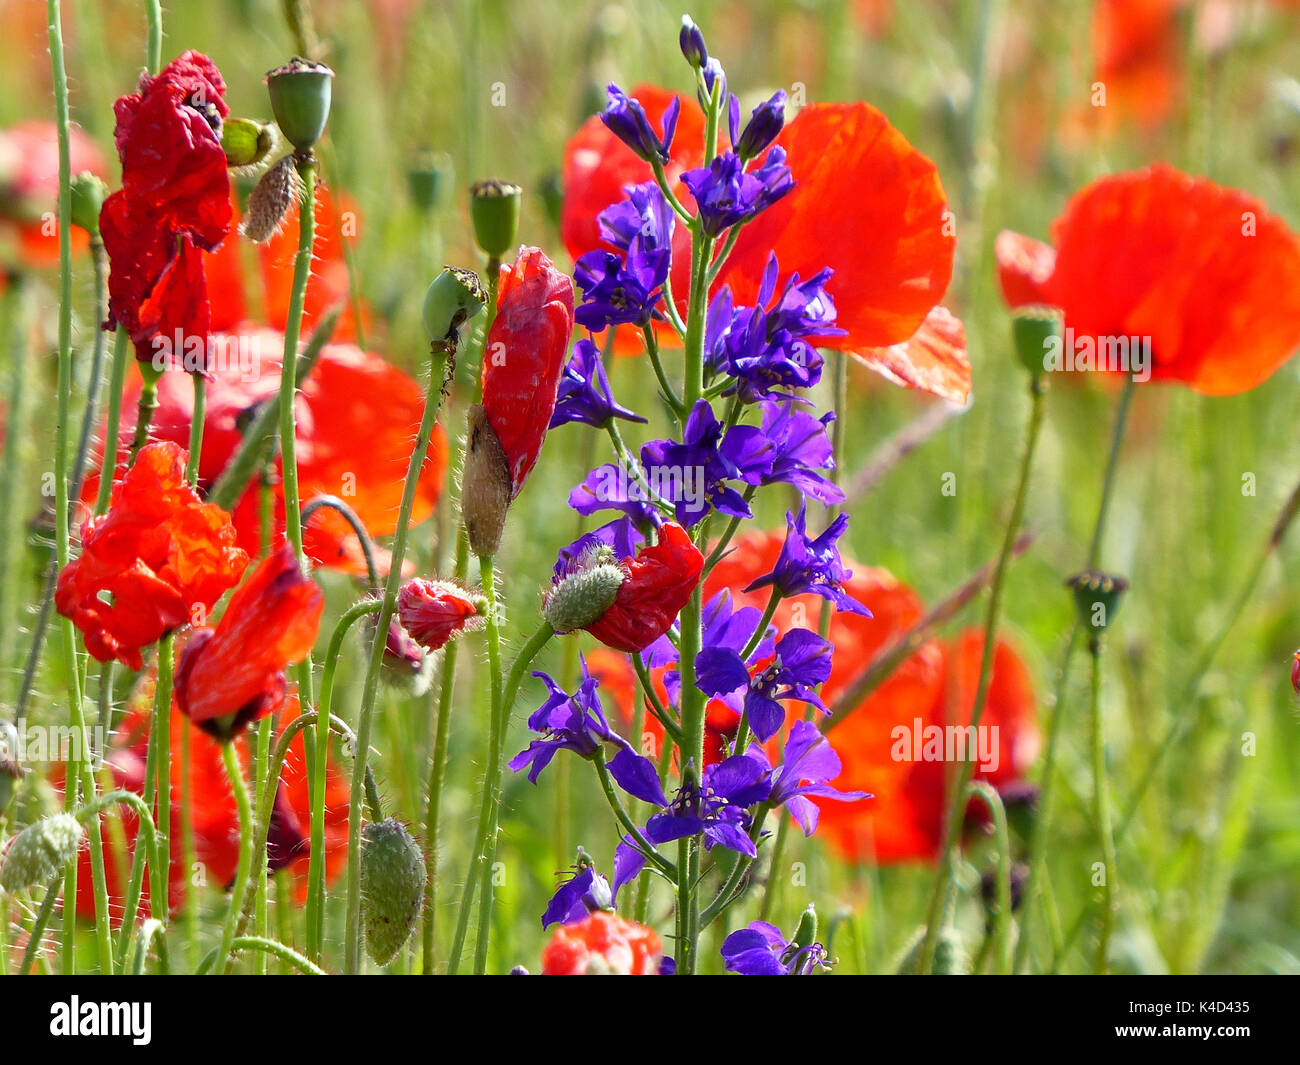 Corn Poppies And Vetchlings, Flower Meadow Stock Photo